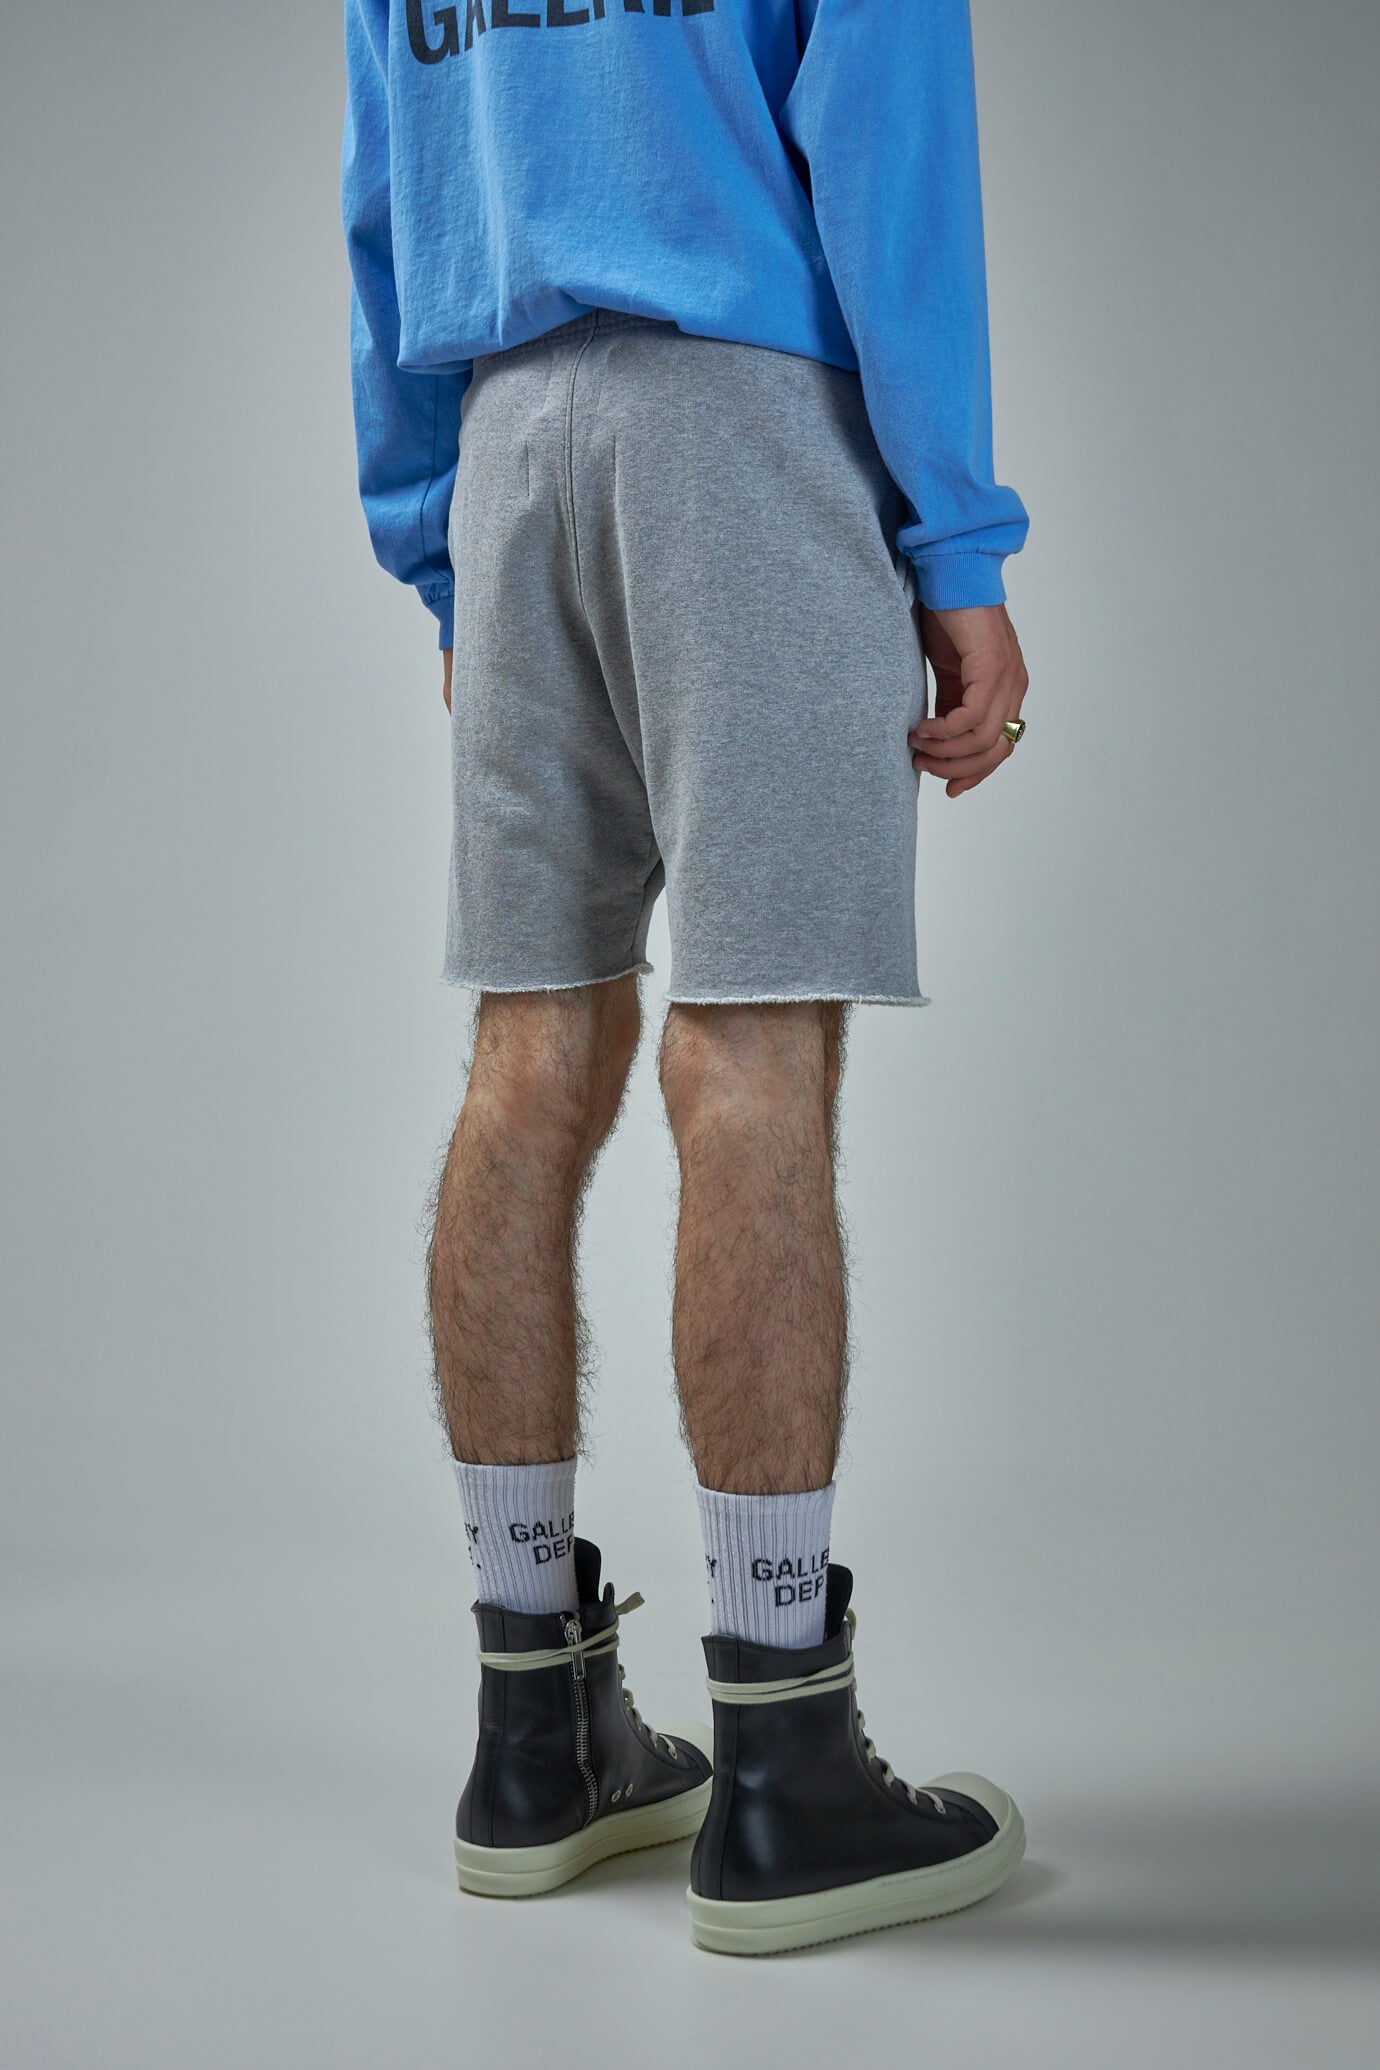 Gallery Dept. French Logo Sweat Shorts – LABELS